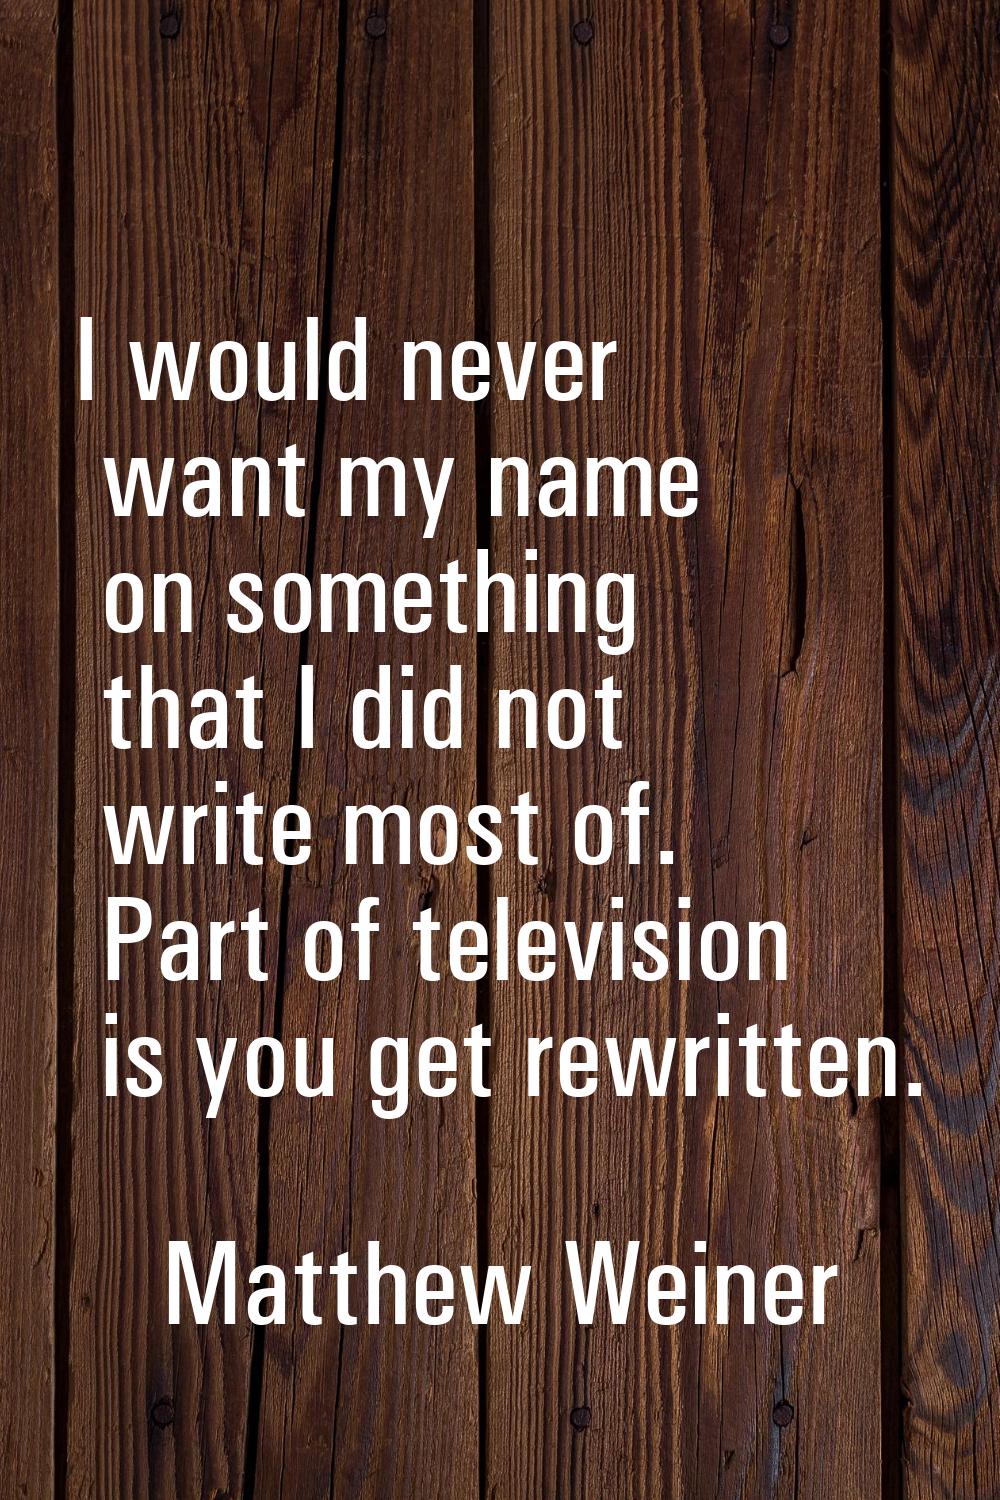 I would never want my name on something that I did not write most of. Part of television is you get